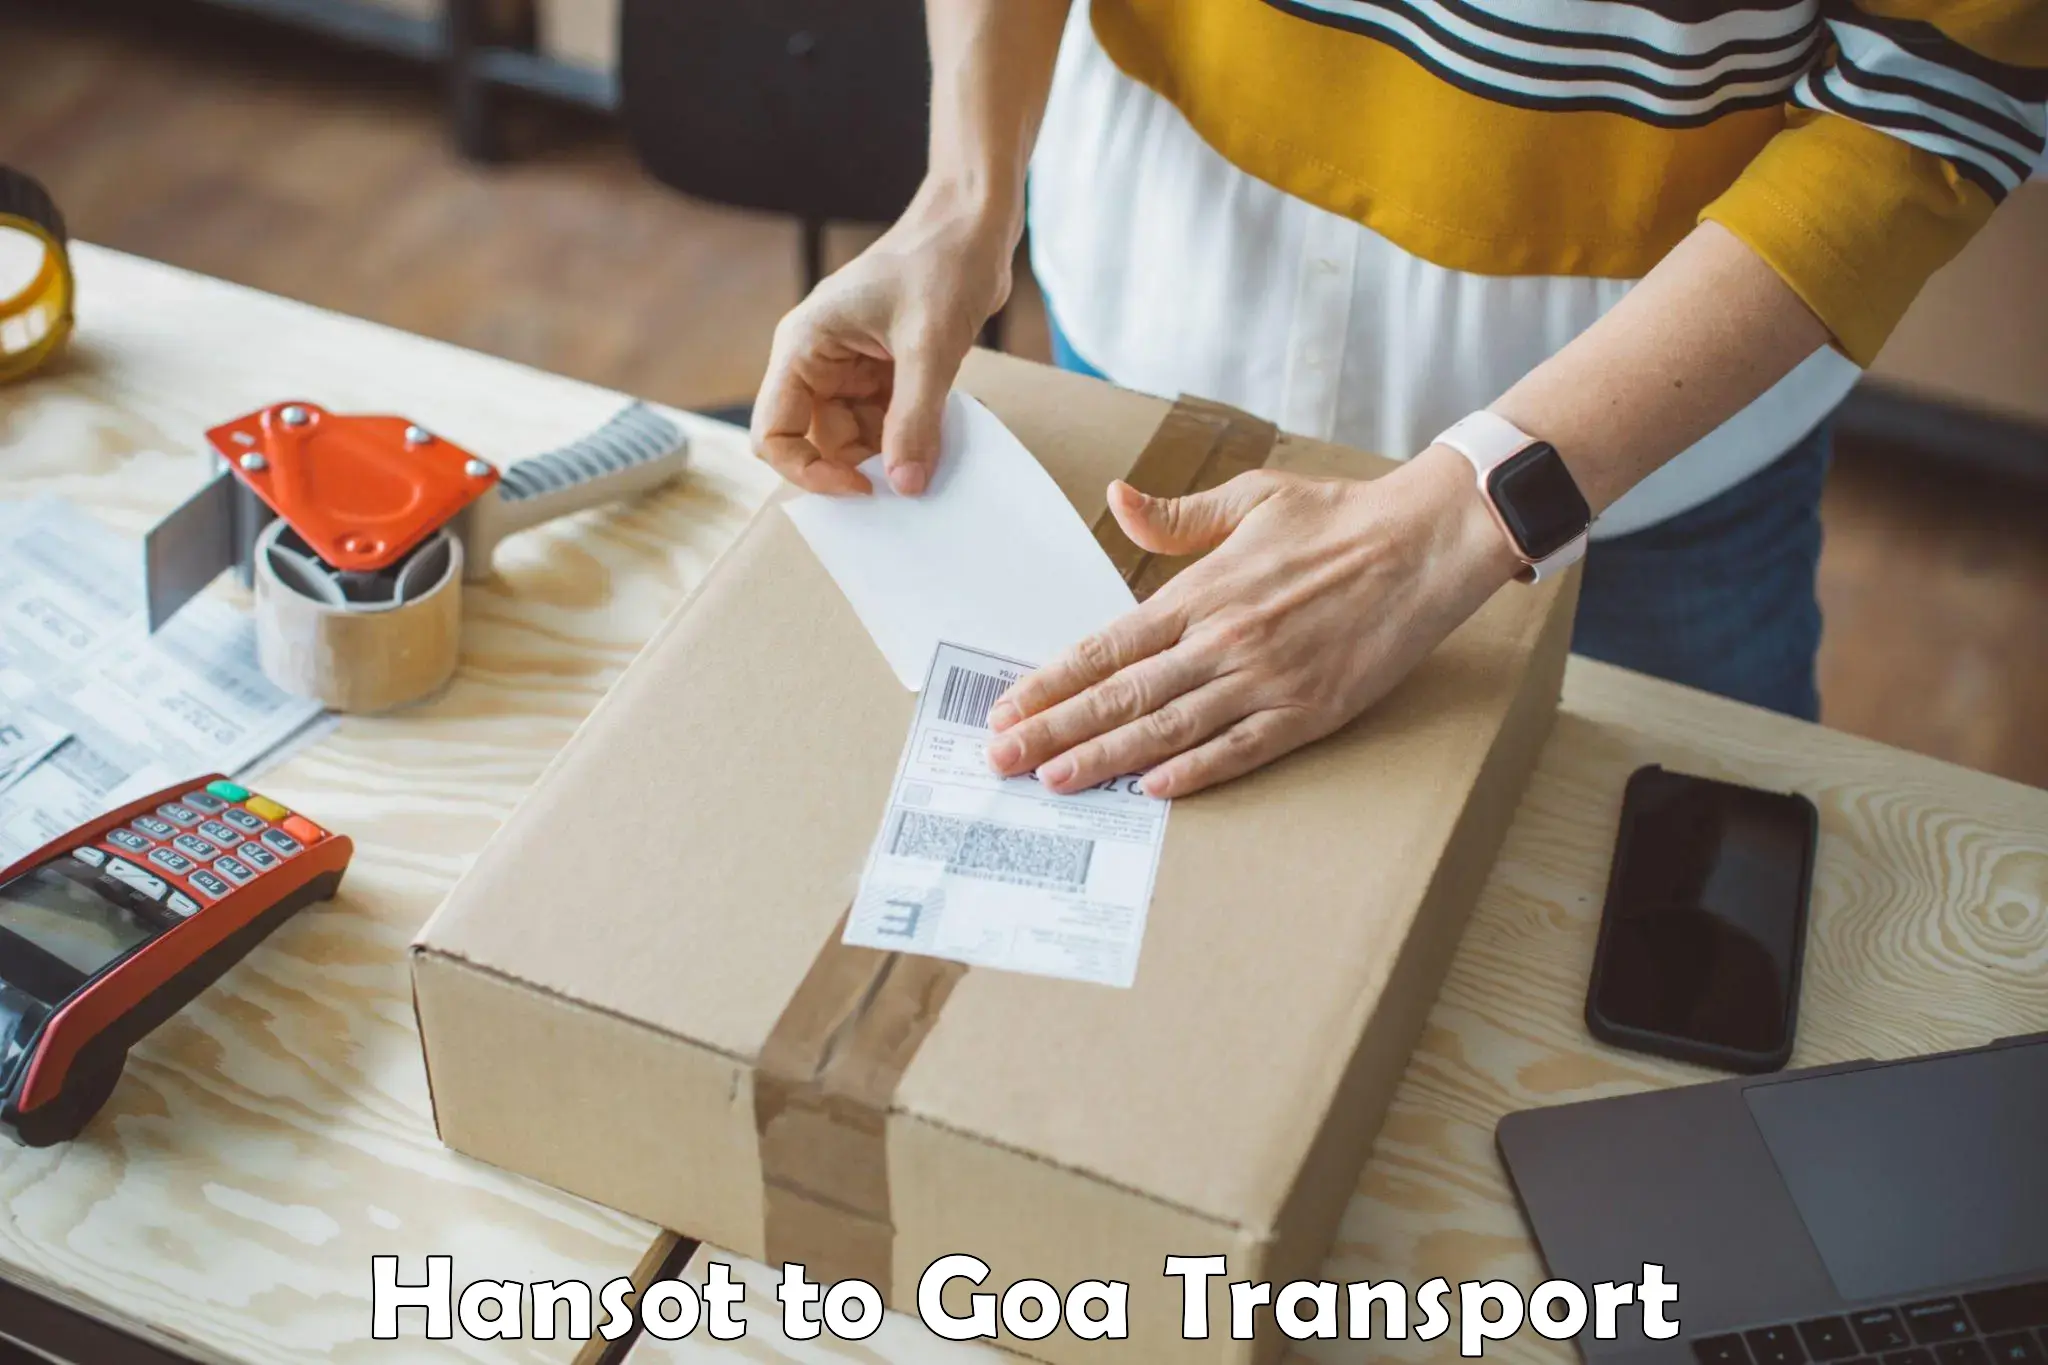 Transport shared services Hansot to Goa